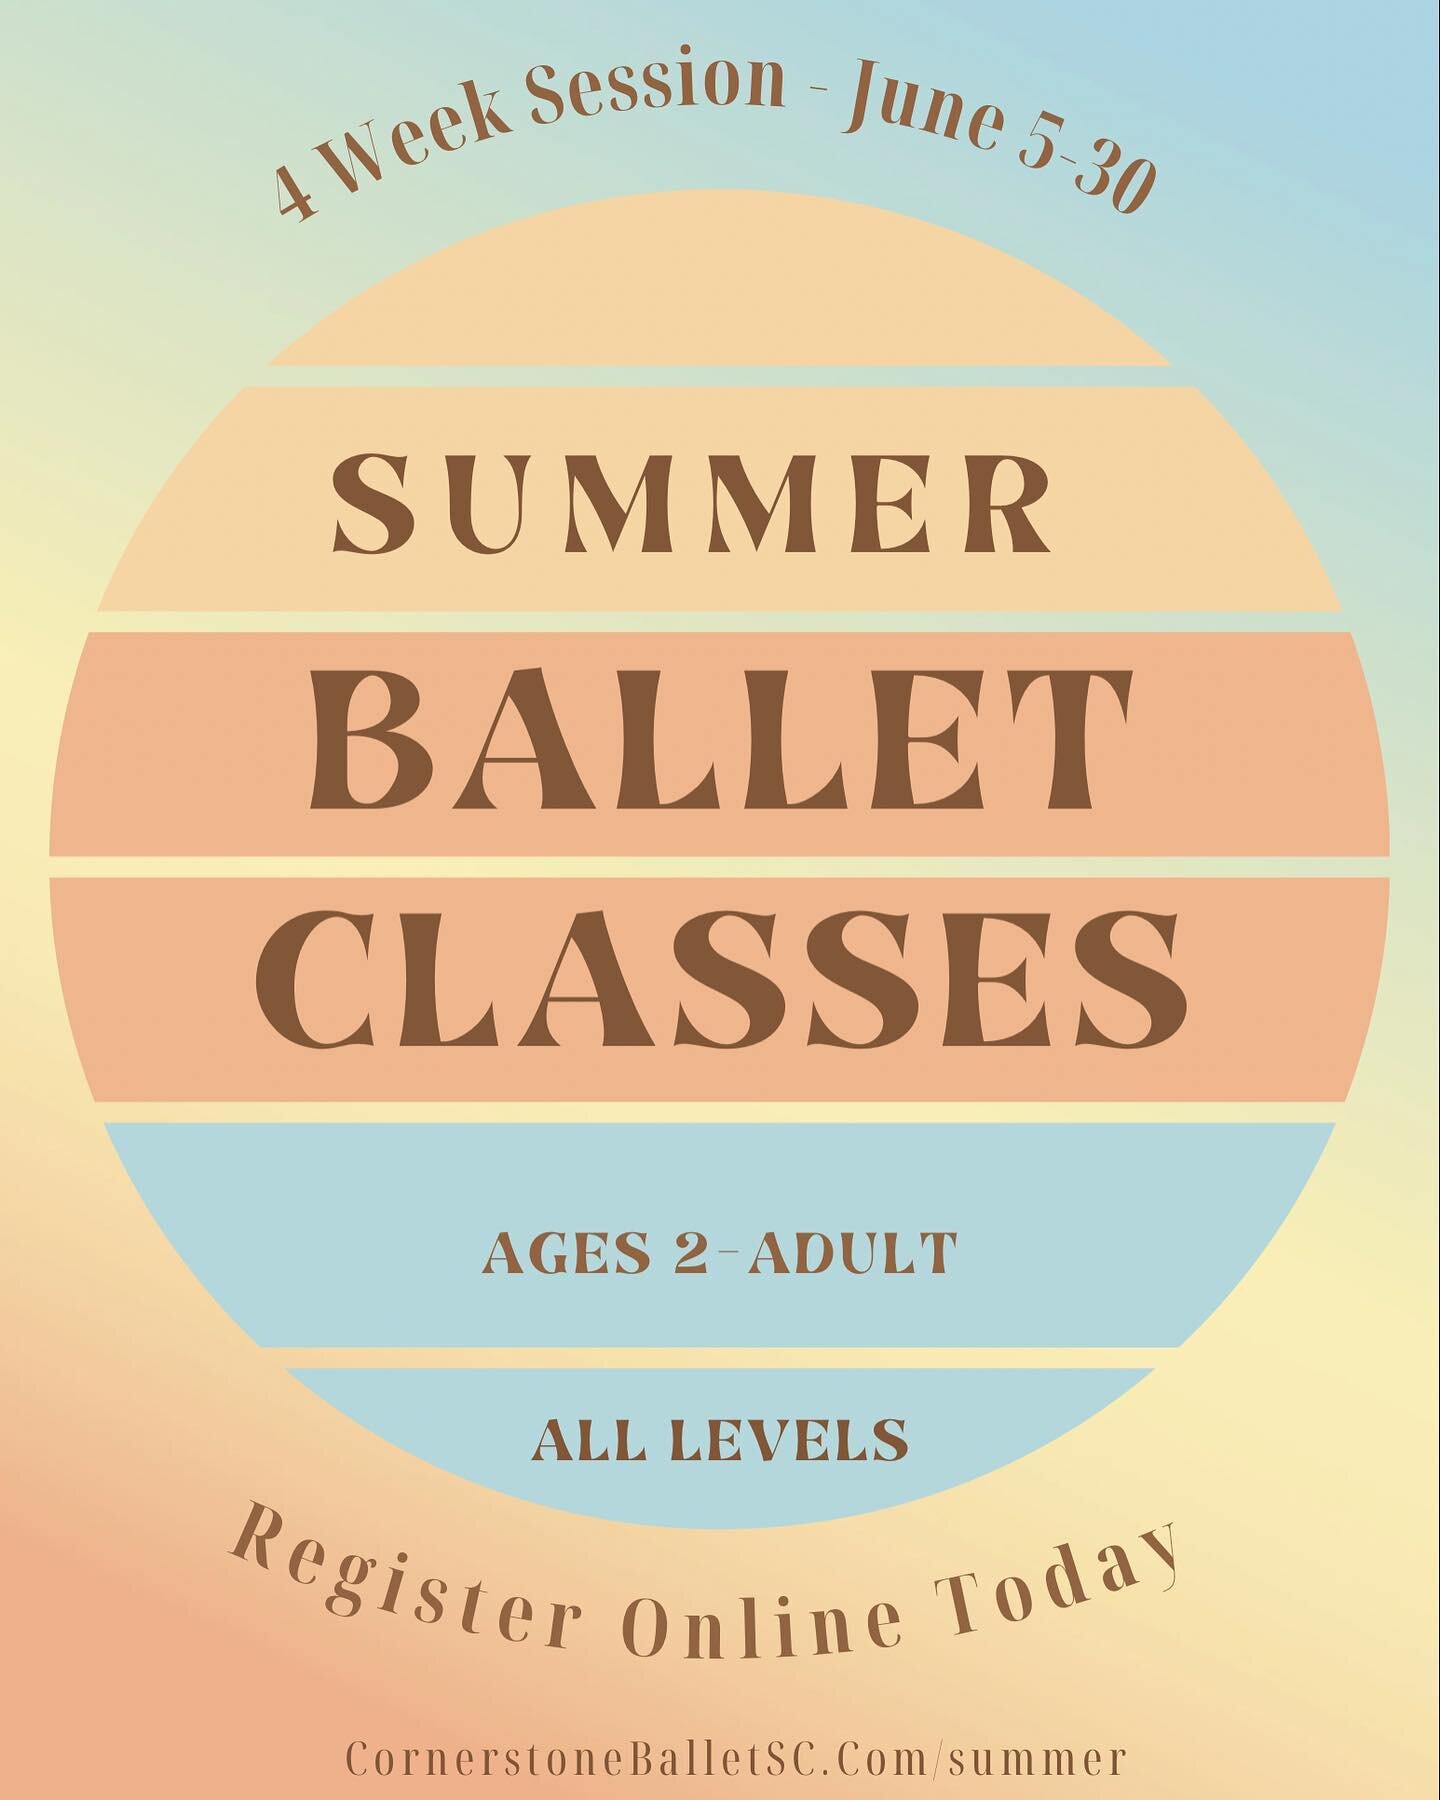 Try something new this summer! Our 4 week summer session is the perfect opportunity to try ballet for the first time or to maintain your skills. Register on our website today! #simpsonvillesouthcarolina @discoversimpsonville